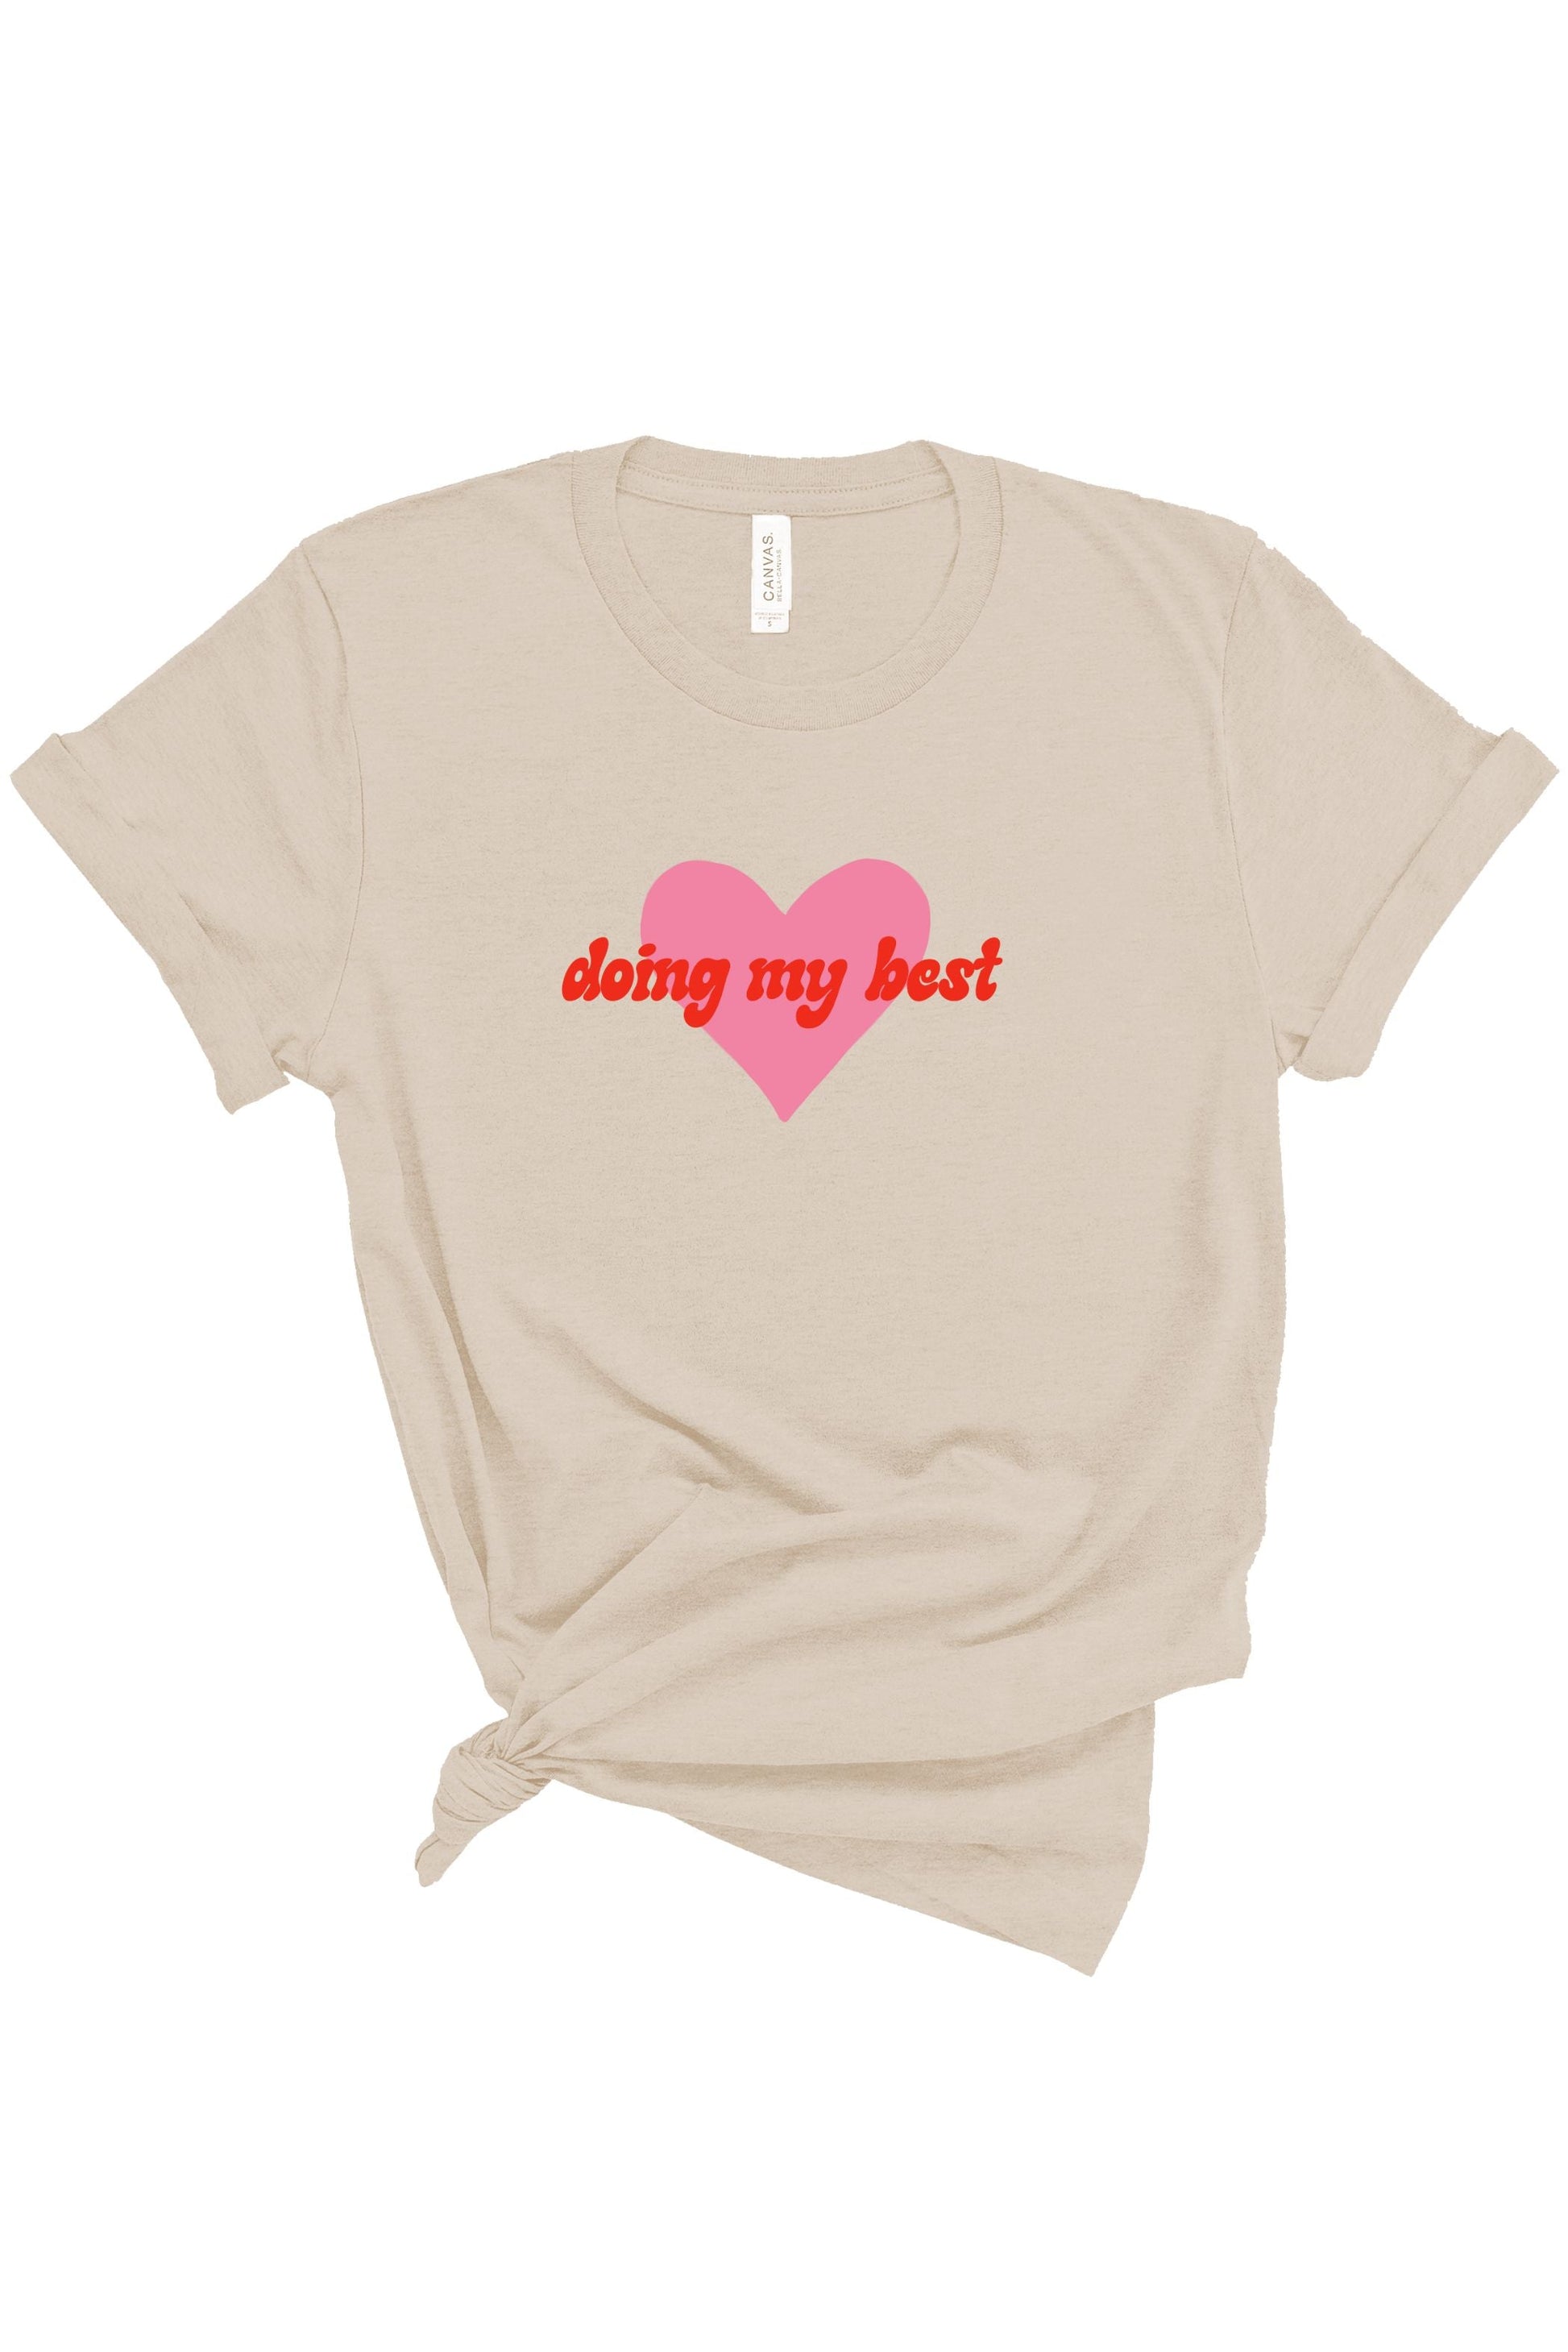 Doing My Best | Tee | Adult-Sister Shirts-Sister Shirts, Cute & Custom Tees for Mama & Littles in Trussville, Alabama.